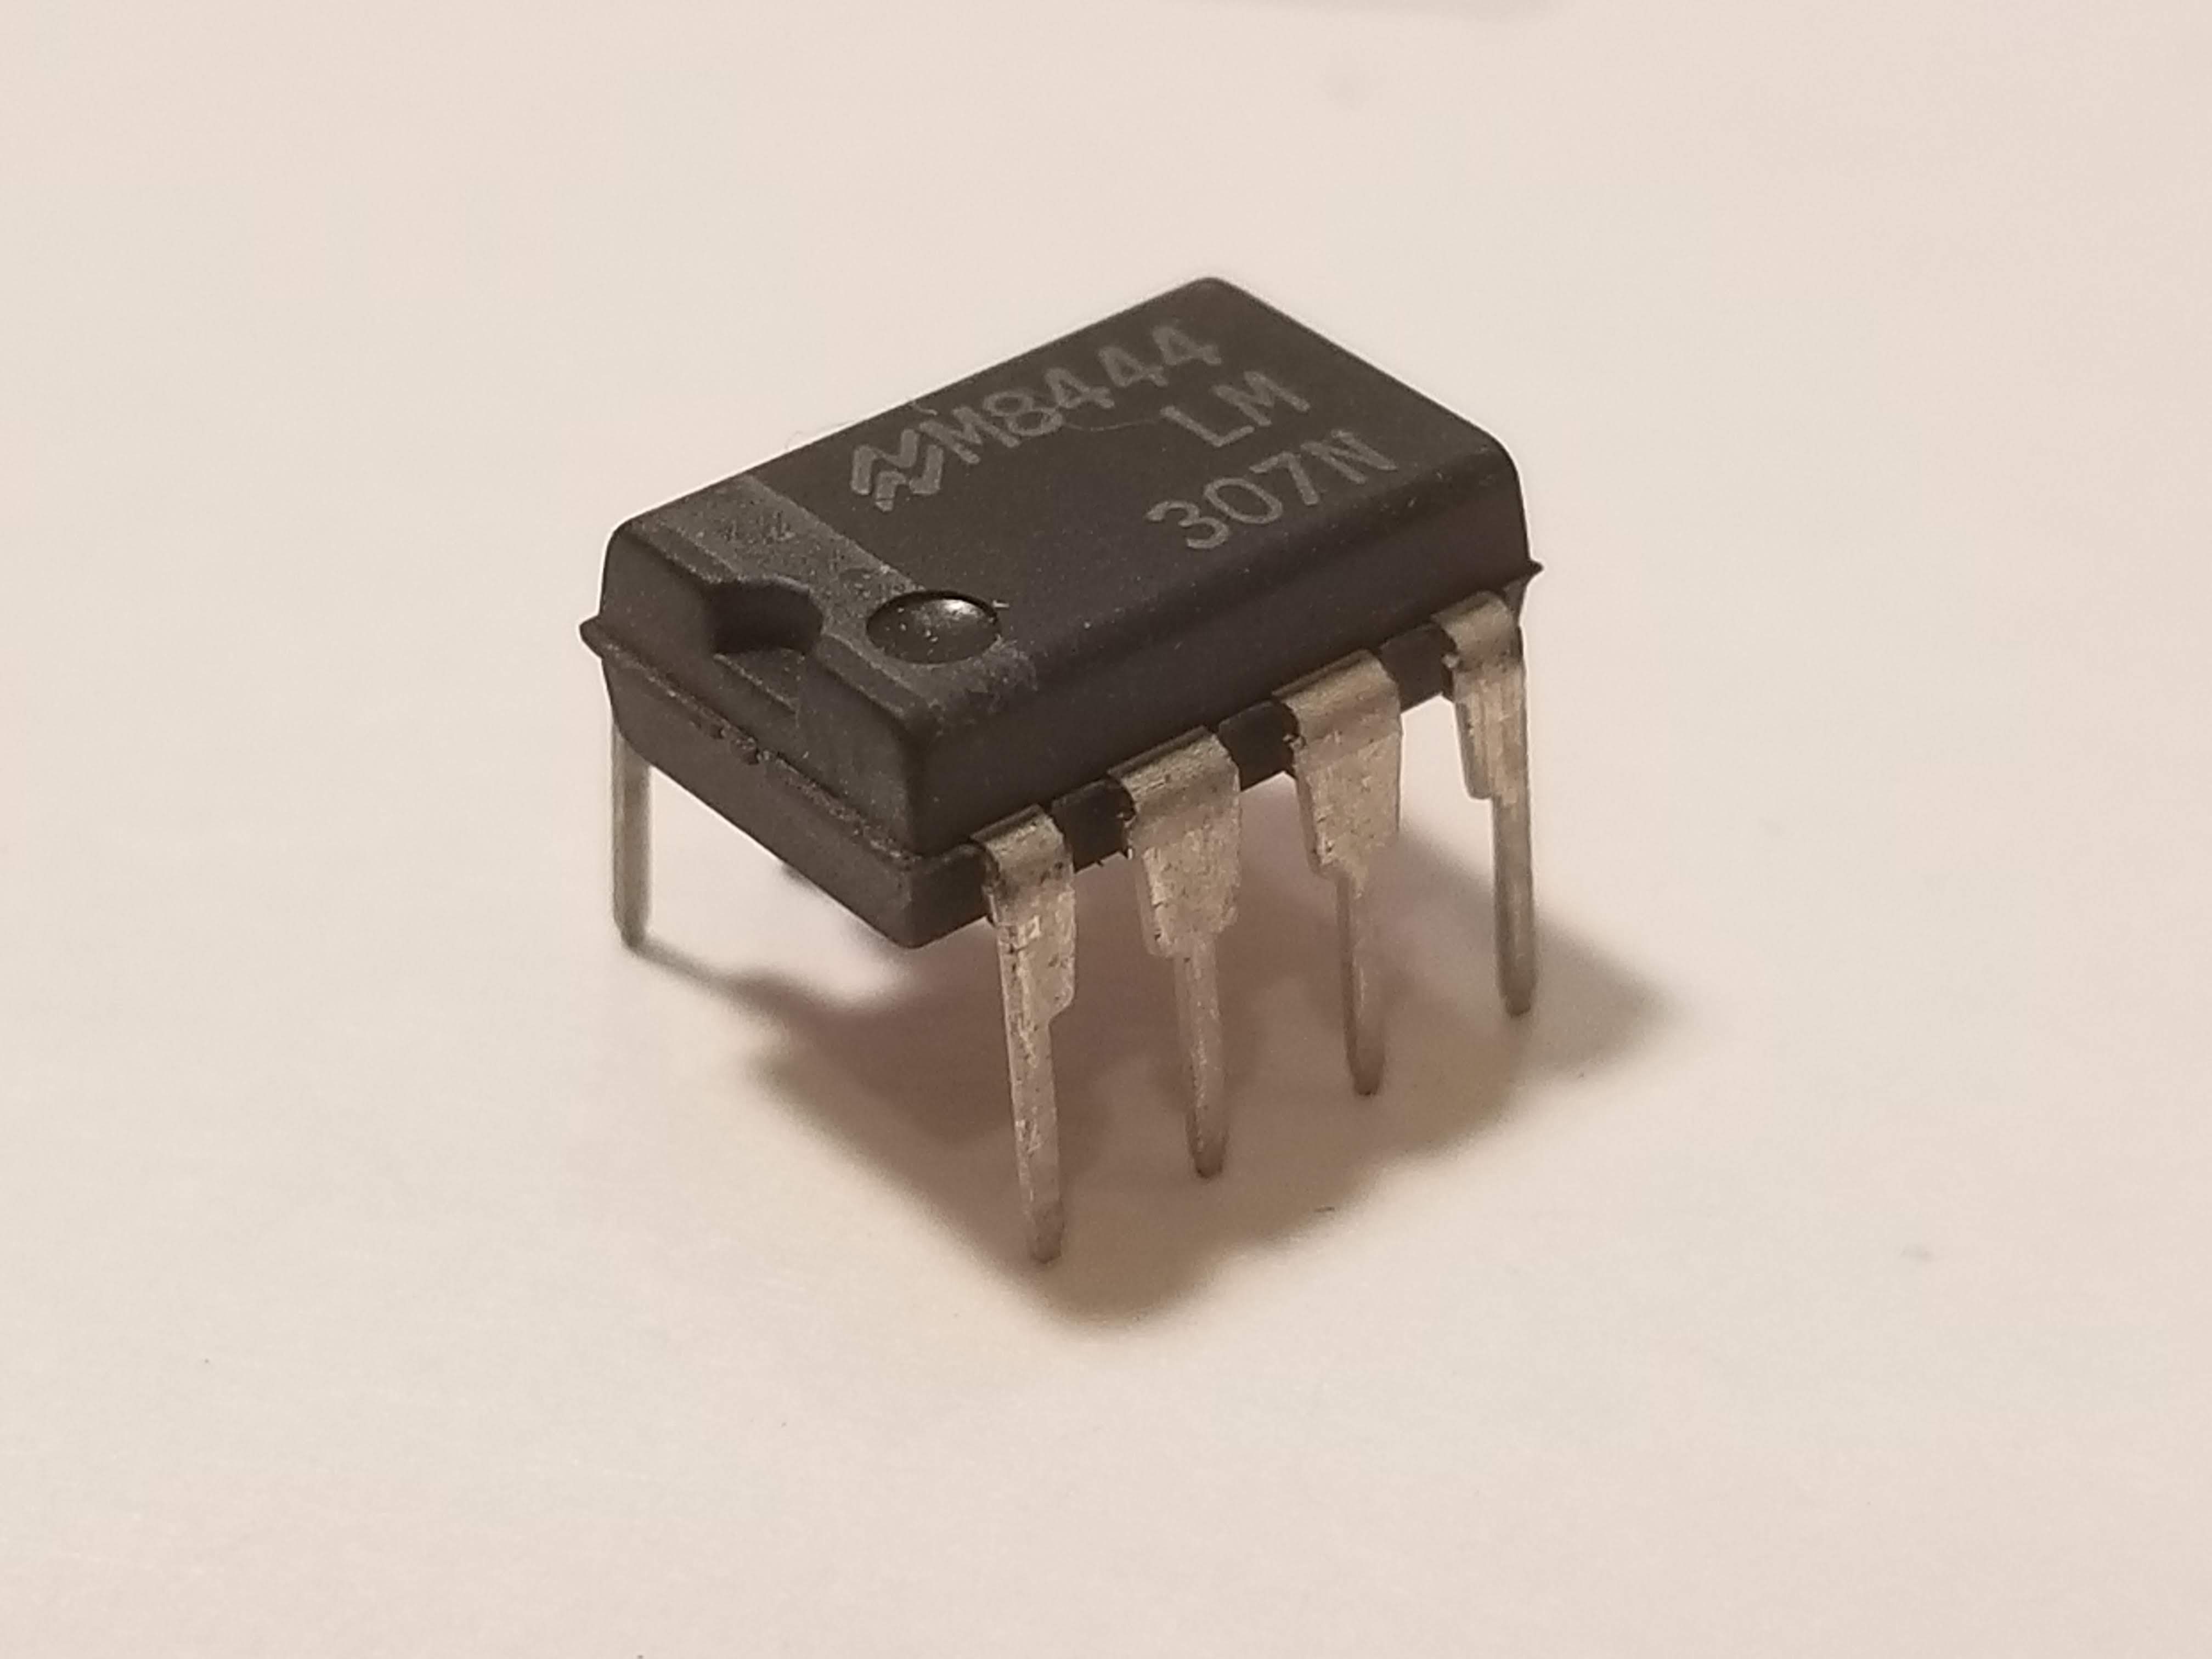 Picture of LM307 Improved 741 Op-Amp